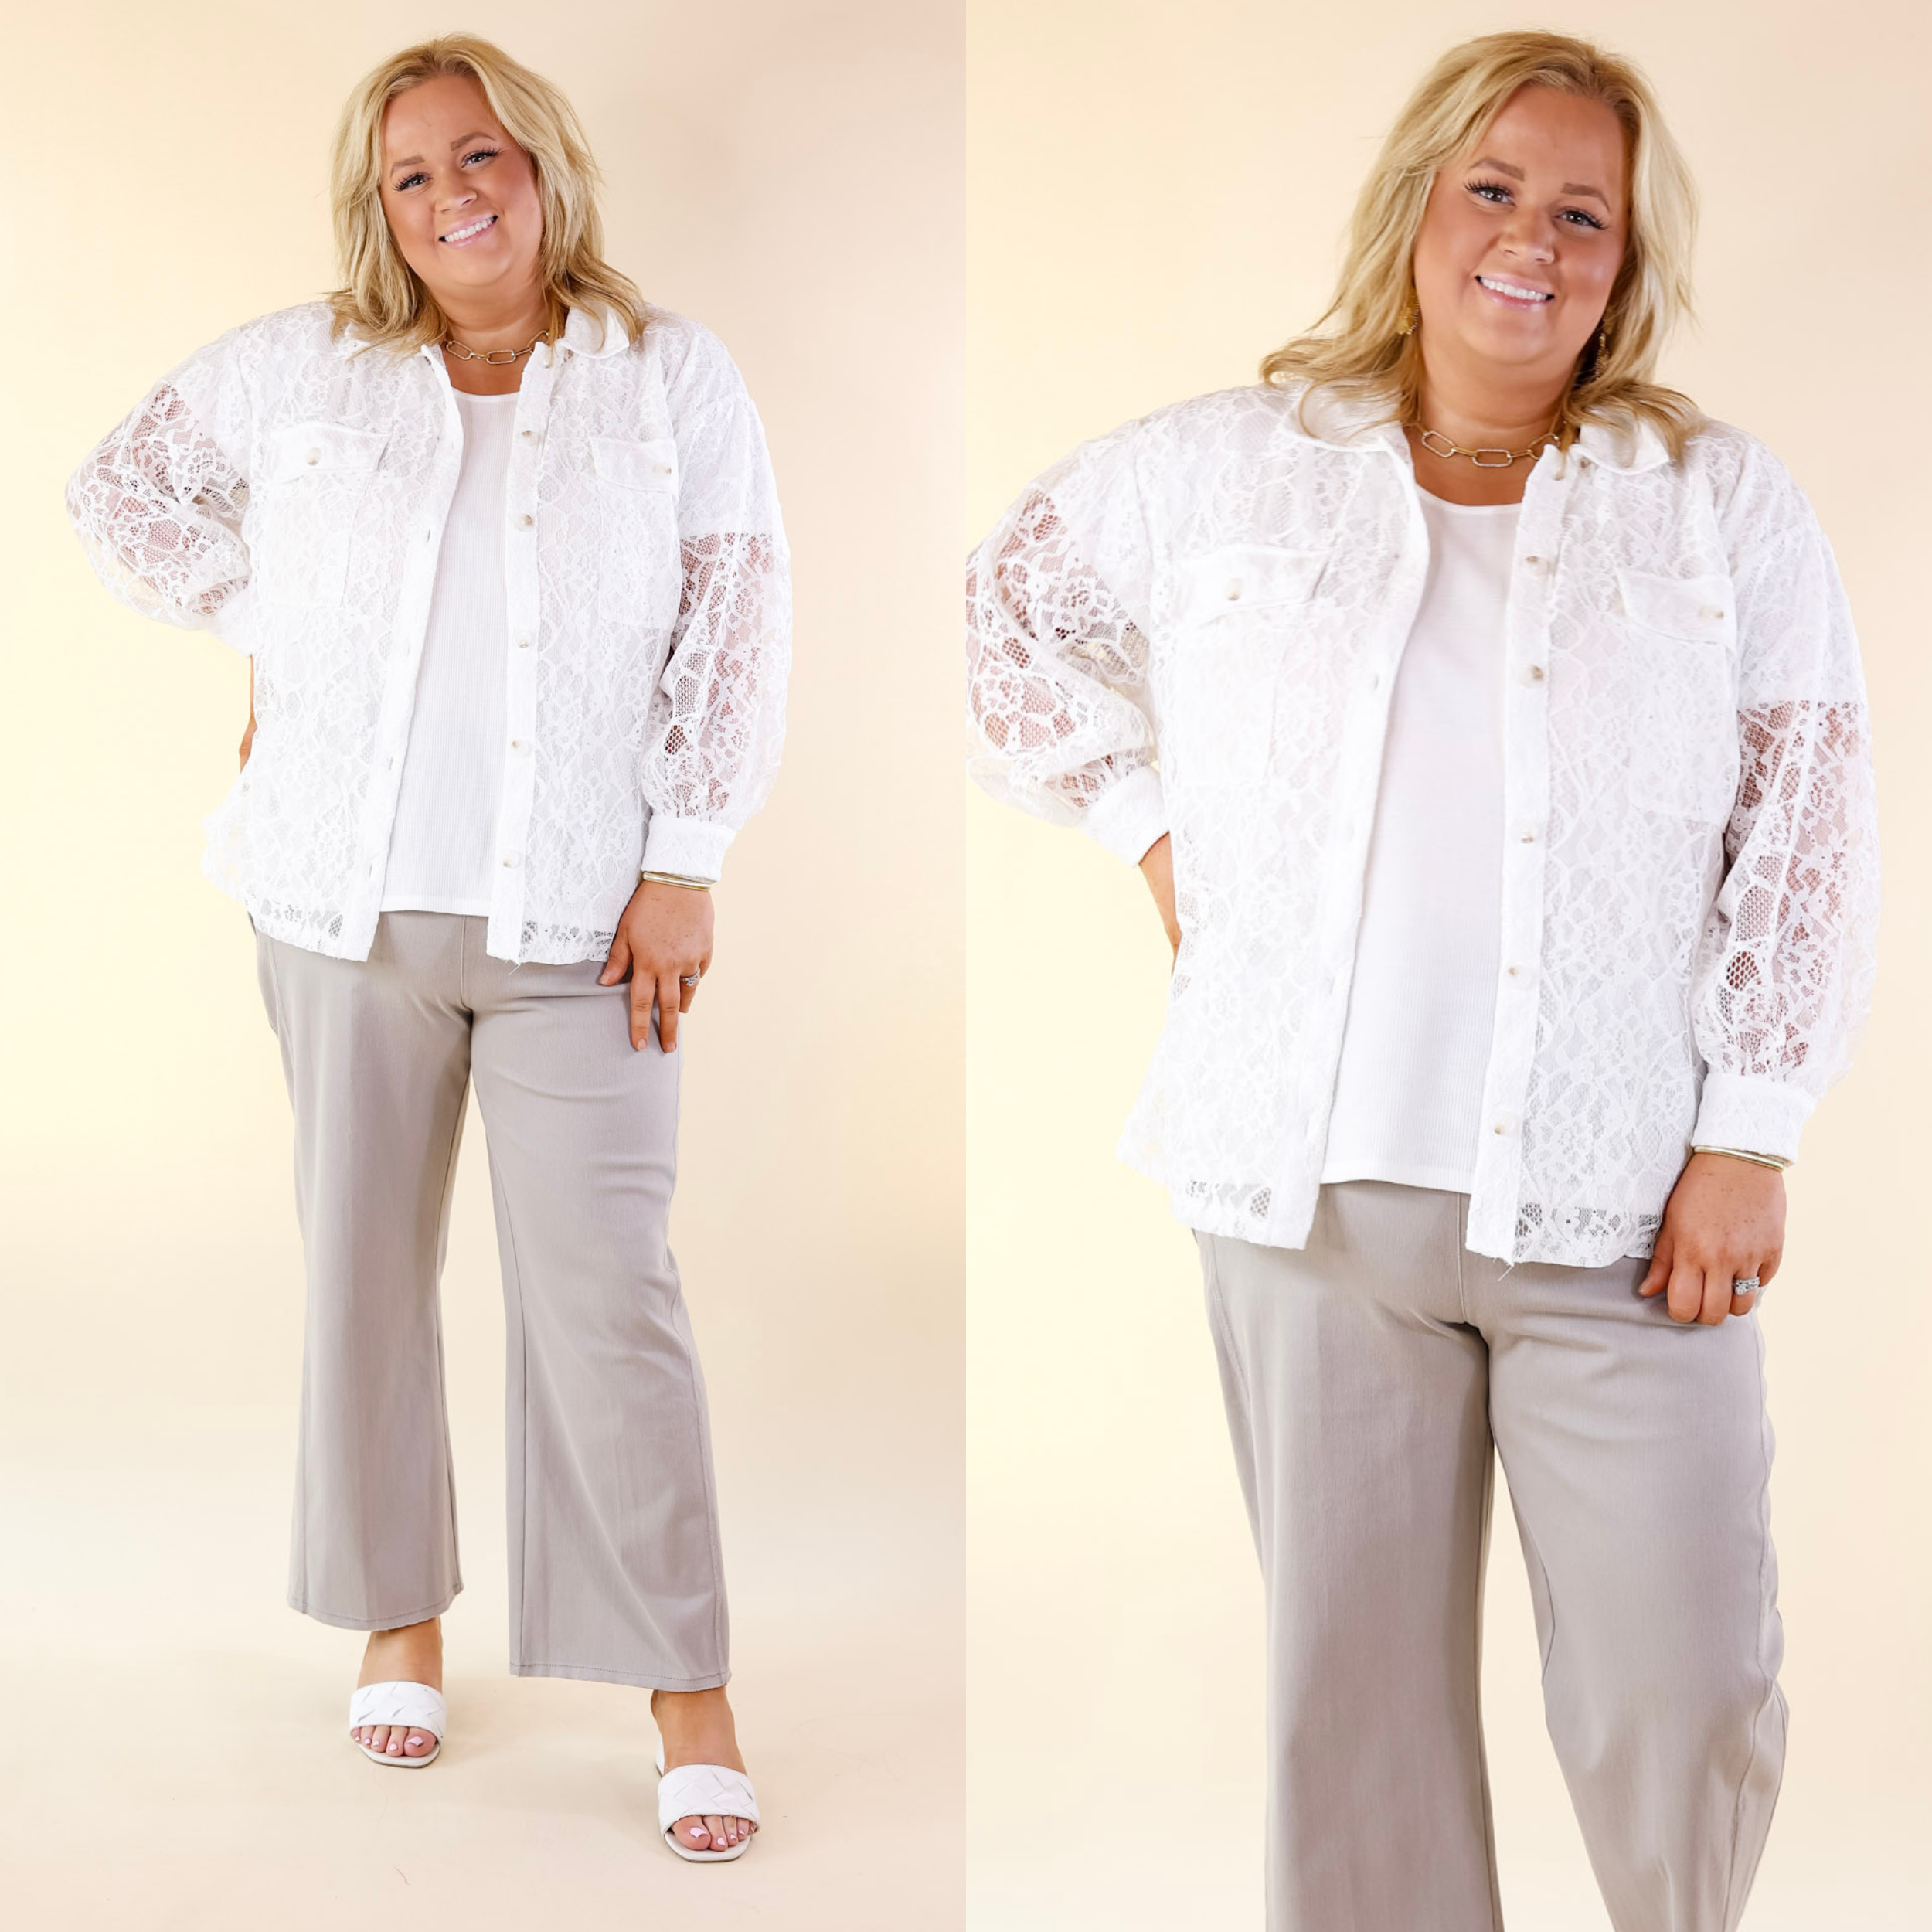 Sheer Chic Collared Button Up Lace Top in White - Giddy Up Glamour Boutique